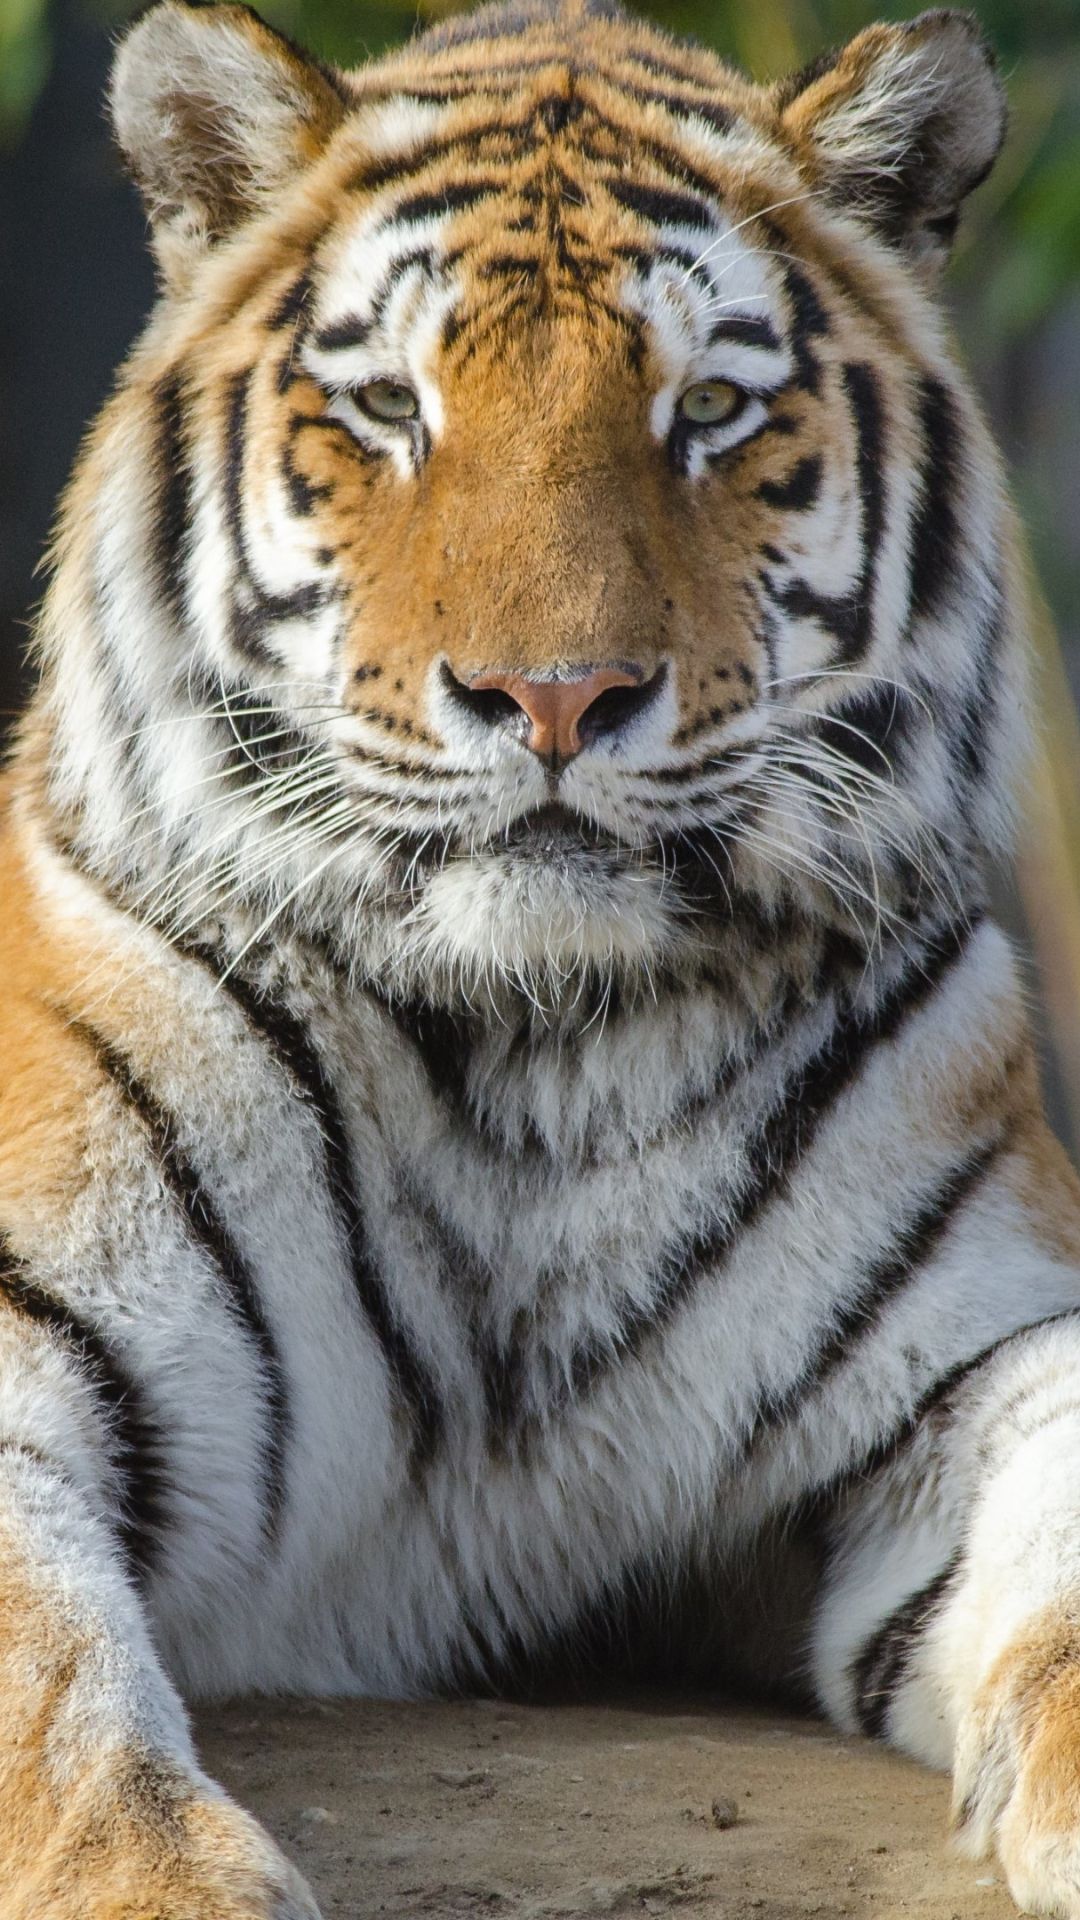 Tiger Background HD Wallpaper For iPhone Wallpaper Ultra